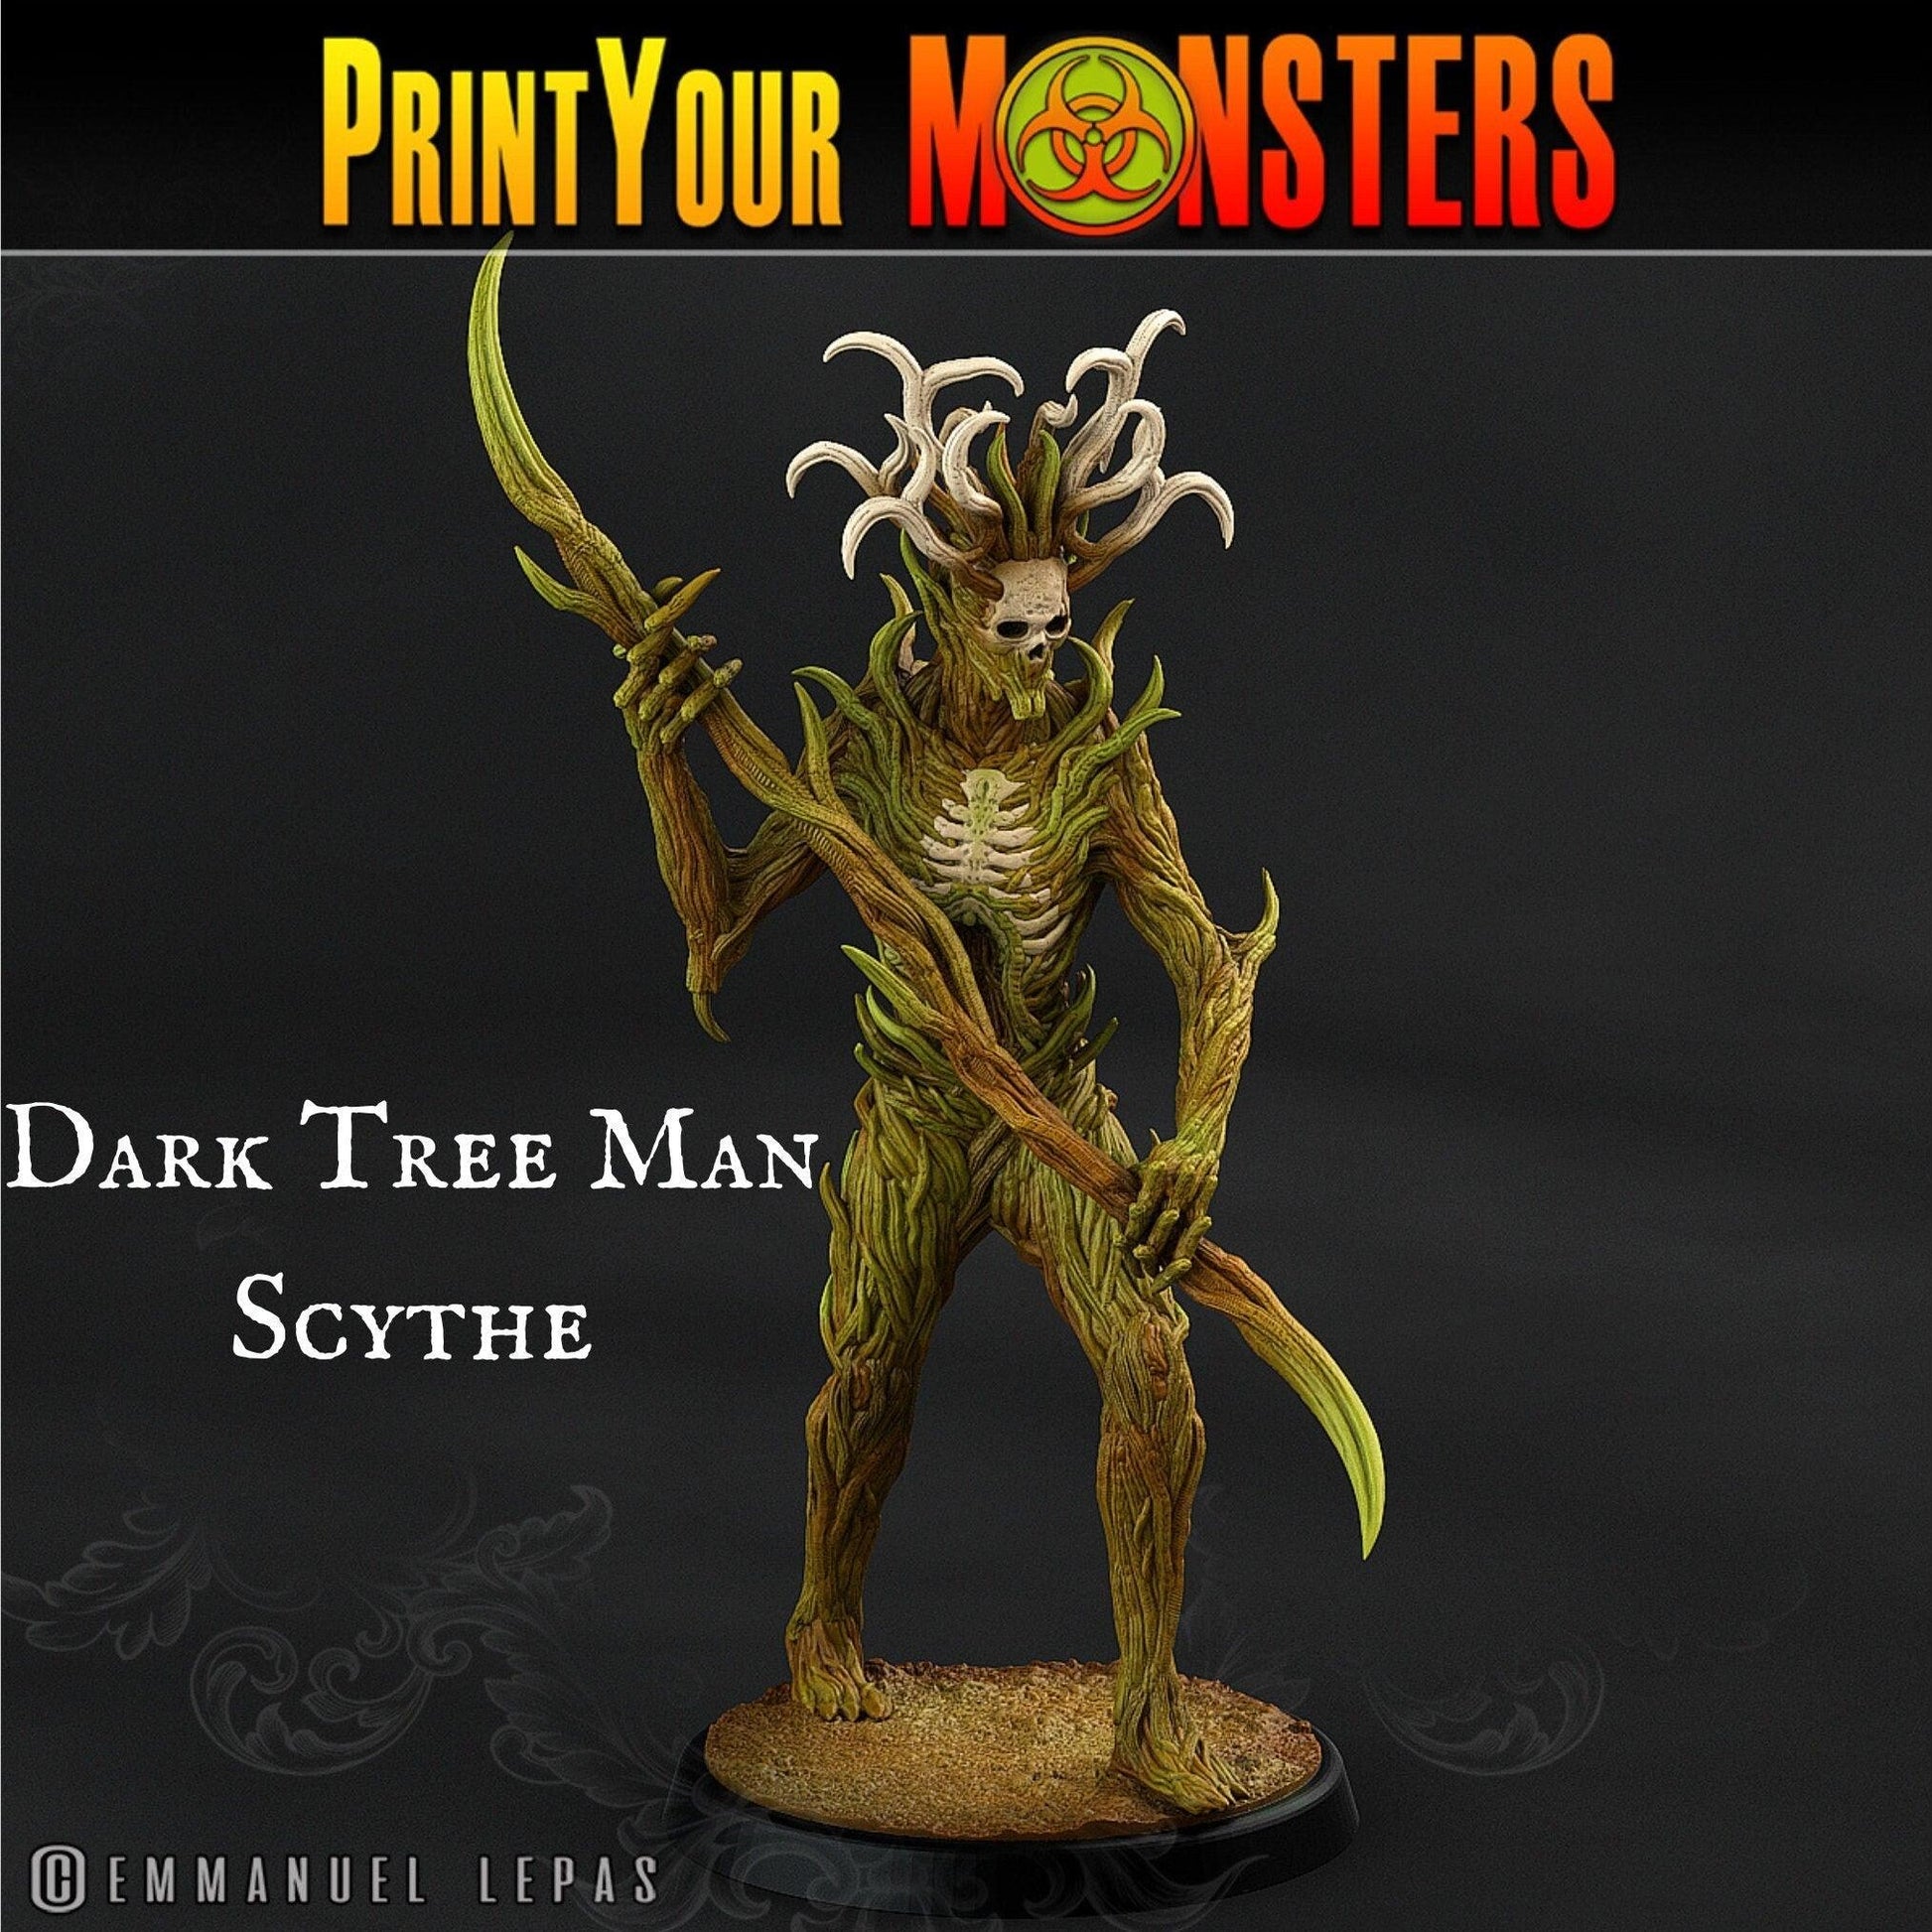 Dark Tree Man Miniatures Bannerman | Print Your Monsters | Tabletop gaming | DnD Miniature | Dungeons and Dragons, dnd 5e dnd monster treant - Plague Miniatures shop for DnD Miniatures